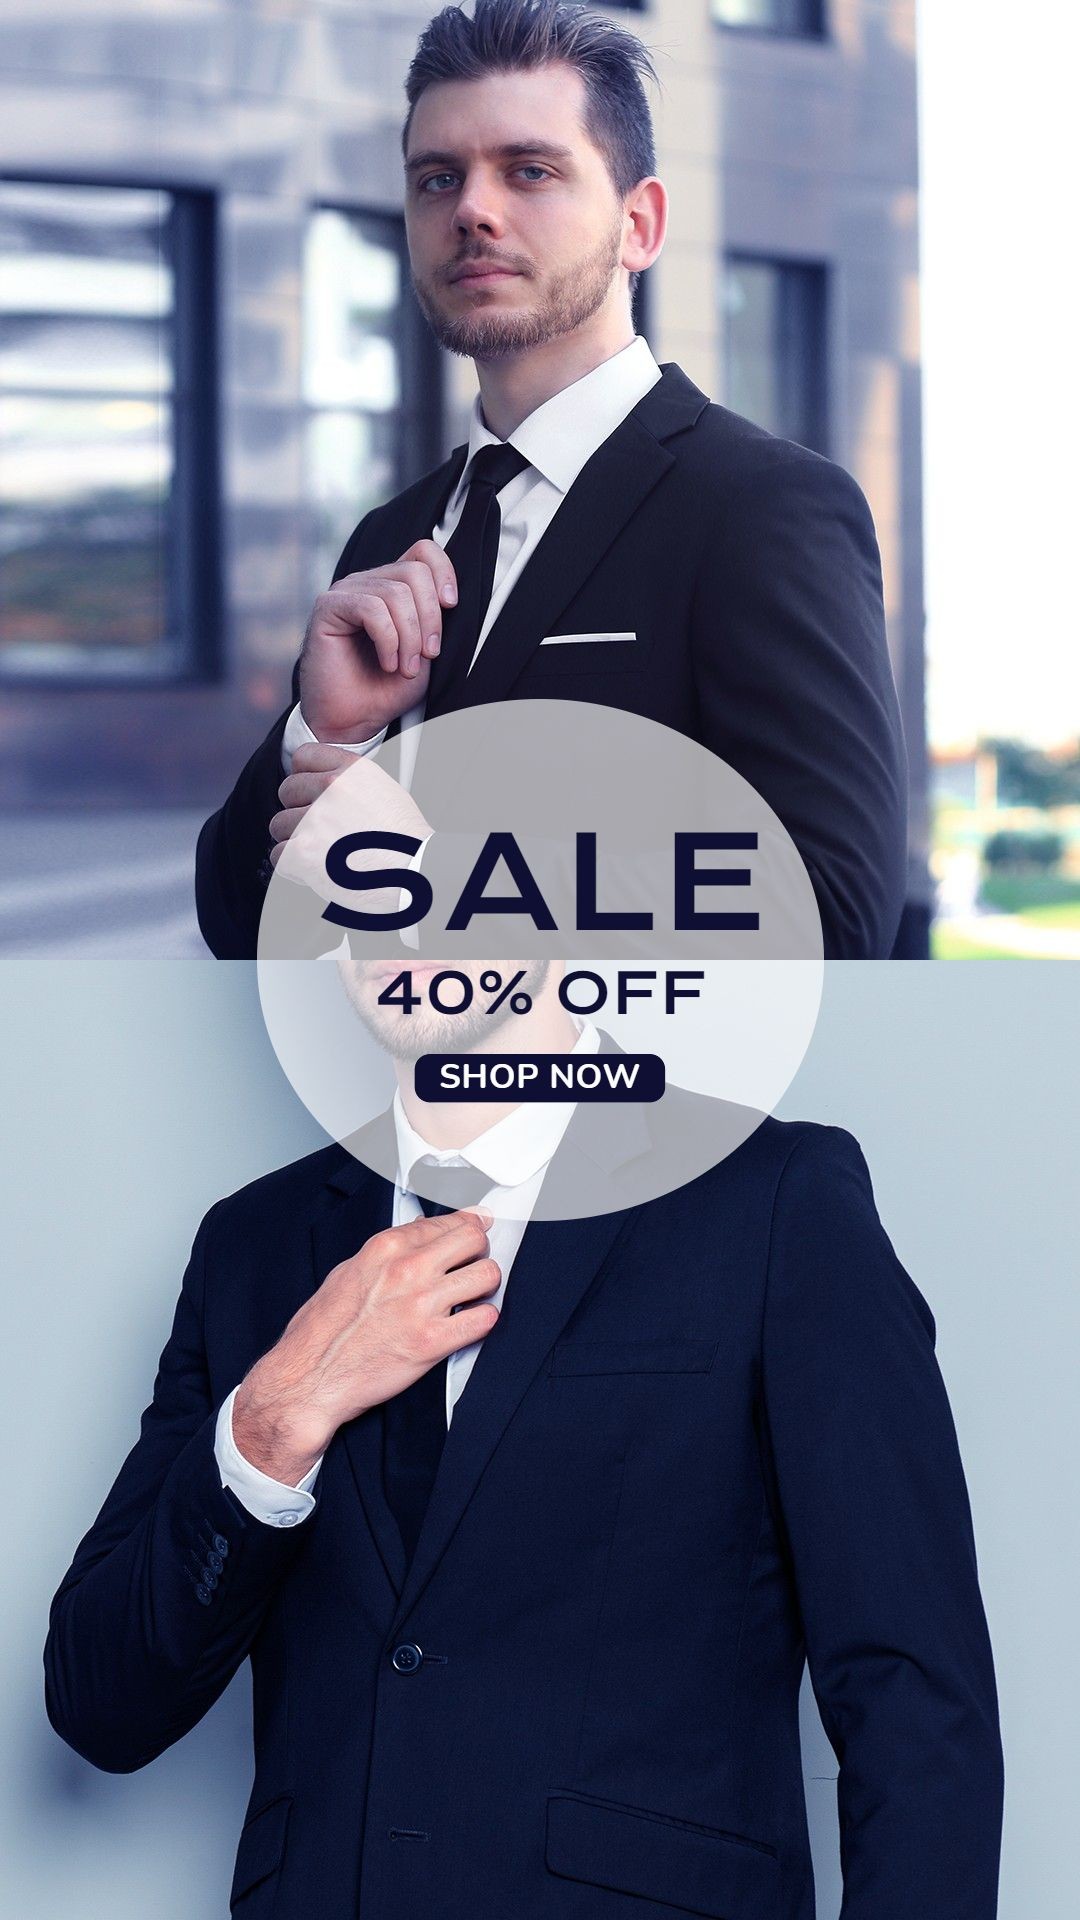 Father's Day Men's Suit Clothing Fashion Discount Sale Promo Ecommerce Story预览效果